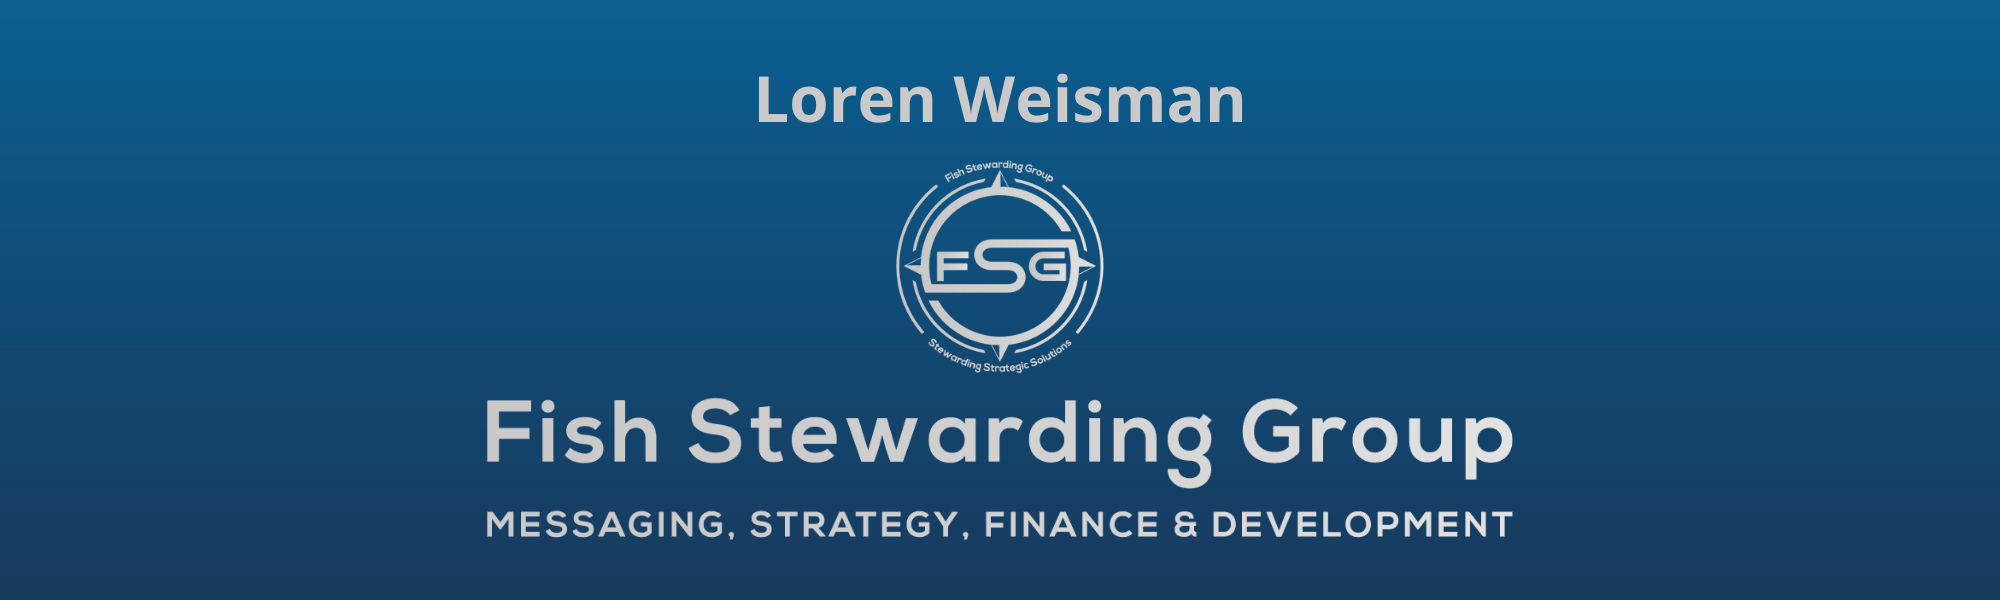 A thin rectangular Footer graphic for the Loren Weisman page. The background is a blue gradient color that goes from a dark blue on the bottom to a lighter blue on top. The text in gray on top reads Loren Weisman. The text in gray on the bottom center reads: Fish Stewarding Group and beneath that, the text reads Messaging, Strategy, Finance and Development. In the center above the text is the FSG logo in gray. The logo has the letters FSG in the middle with a circle with four pointed arrows facing north, south, east and west with the S connected to that circle. Four rounded lines make the next circle of the circle and the last layer is a thin circle with the text on the Bottom that reads Stewarding Strategist Solutions and on top, the text reads Fish Stewarding Group.